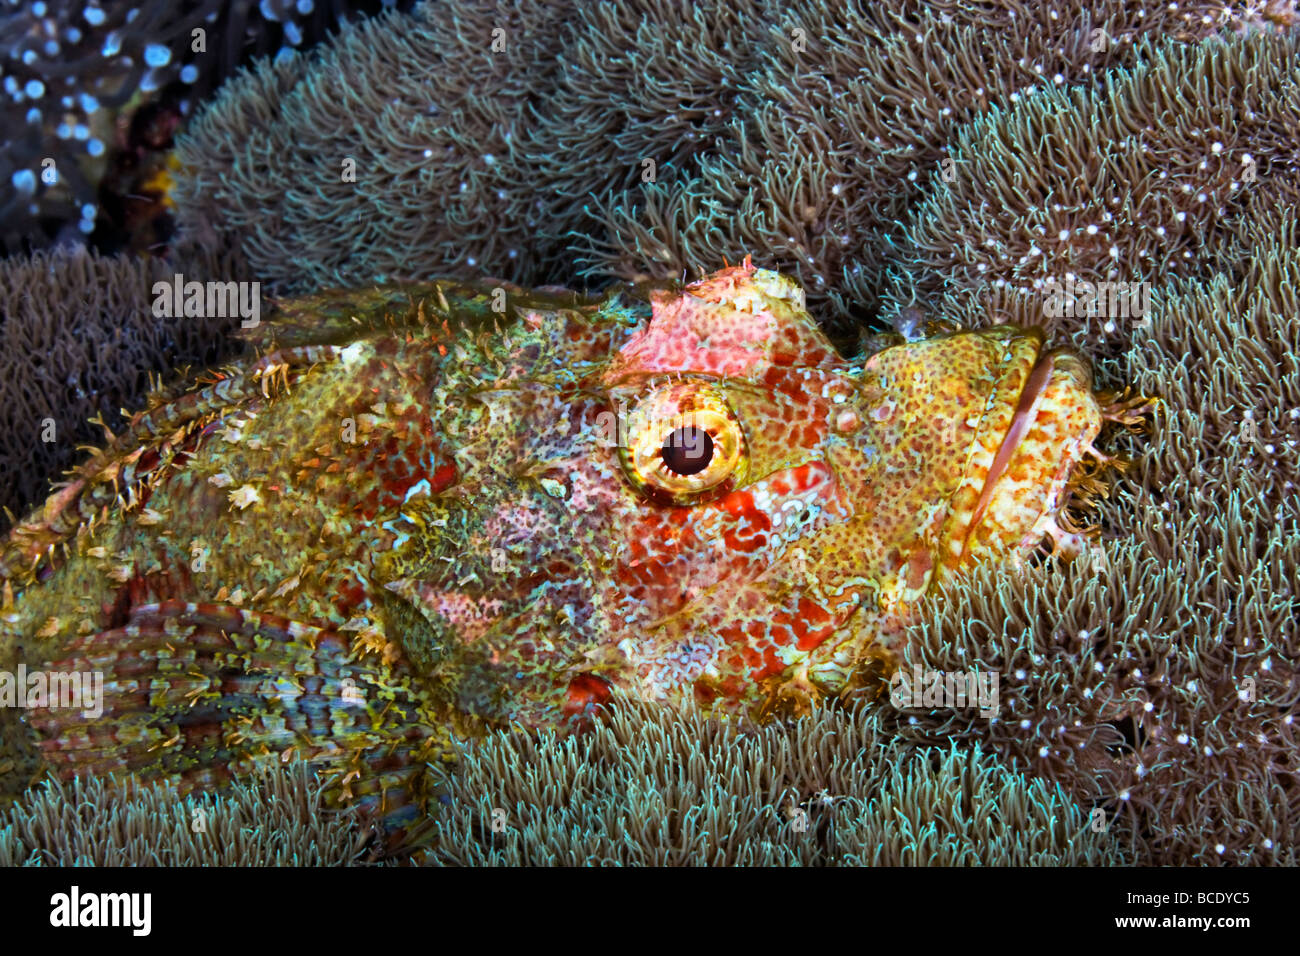 A Reef Scorpionfish nestles amongst the corals on a reef in the Flores Sea near Komodo Island, Indonesia. Stock Photo